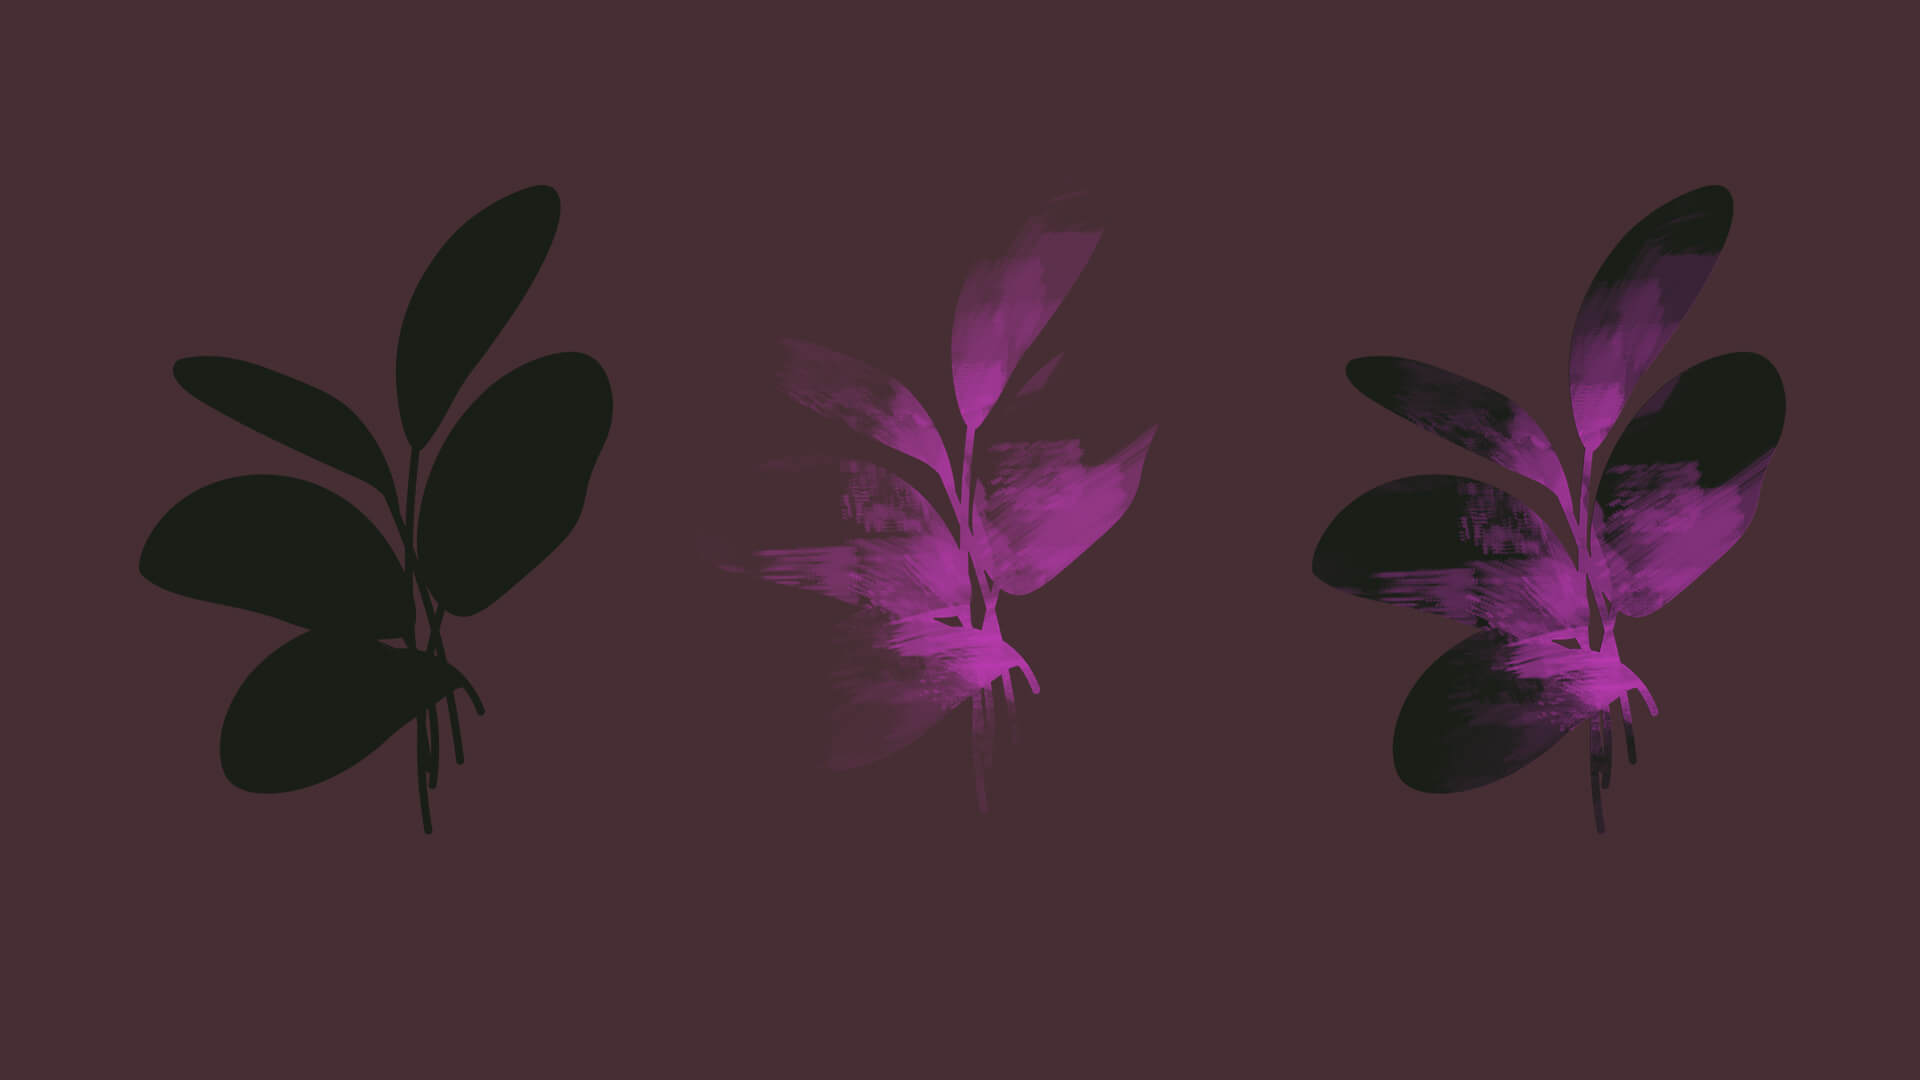 Three images: the outline of the plant, the transparent texture, and the two combined.